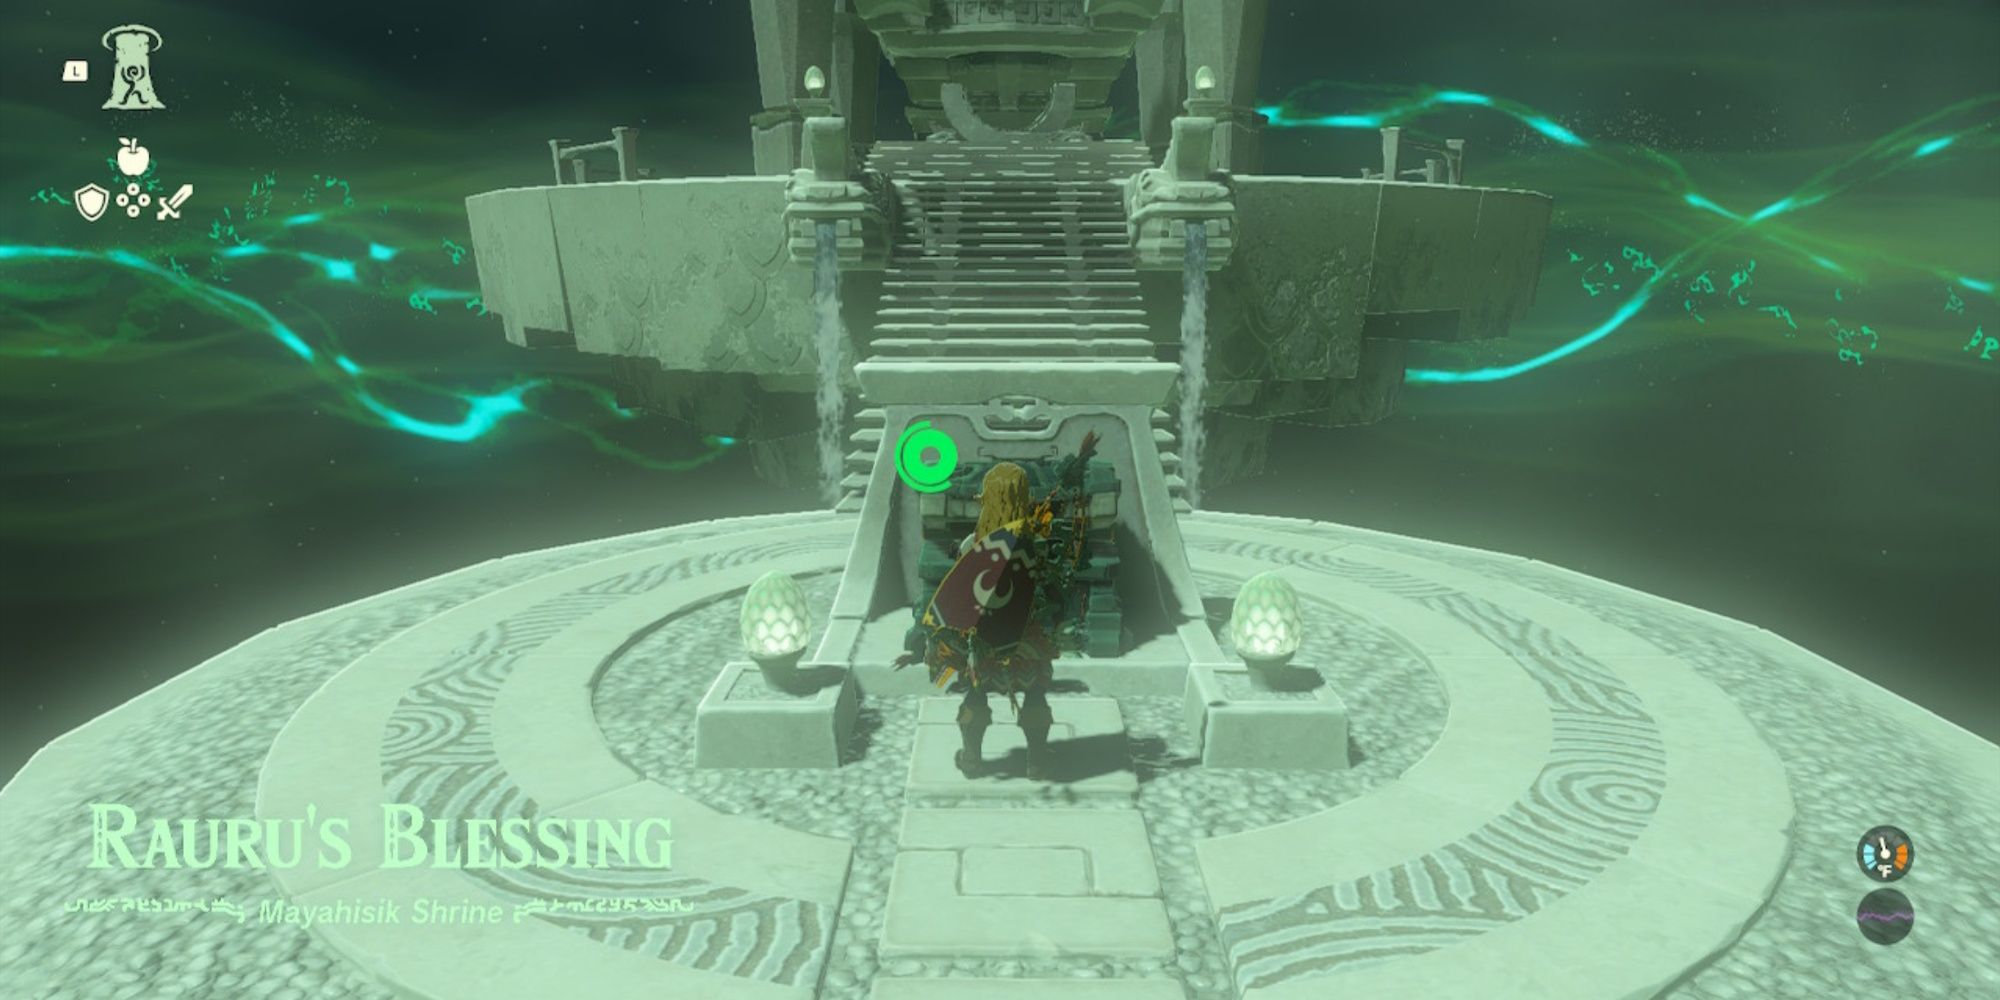 Link to get the magic scepter from the Mayahishik temple treasure chest in 